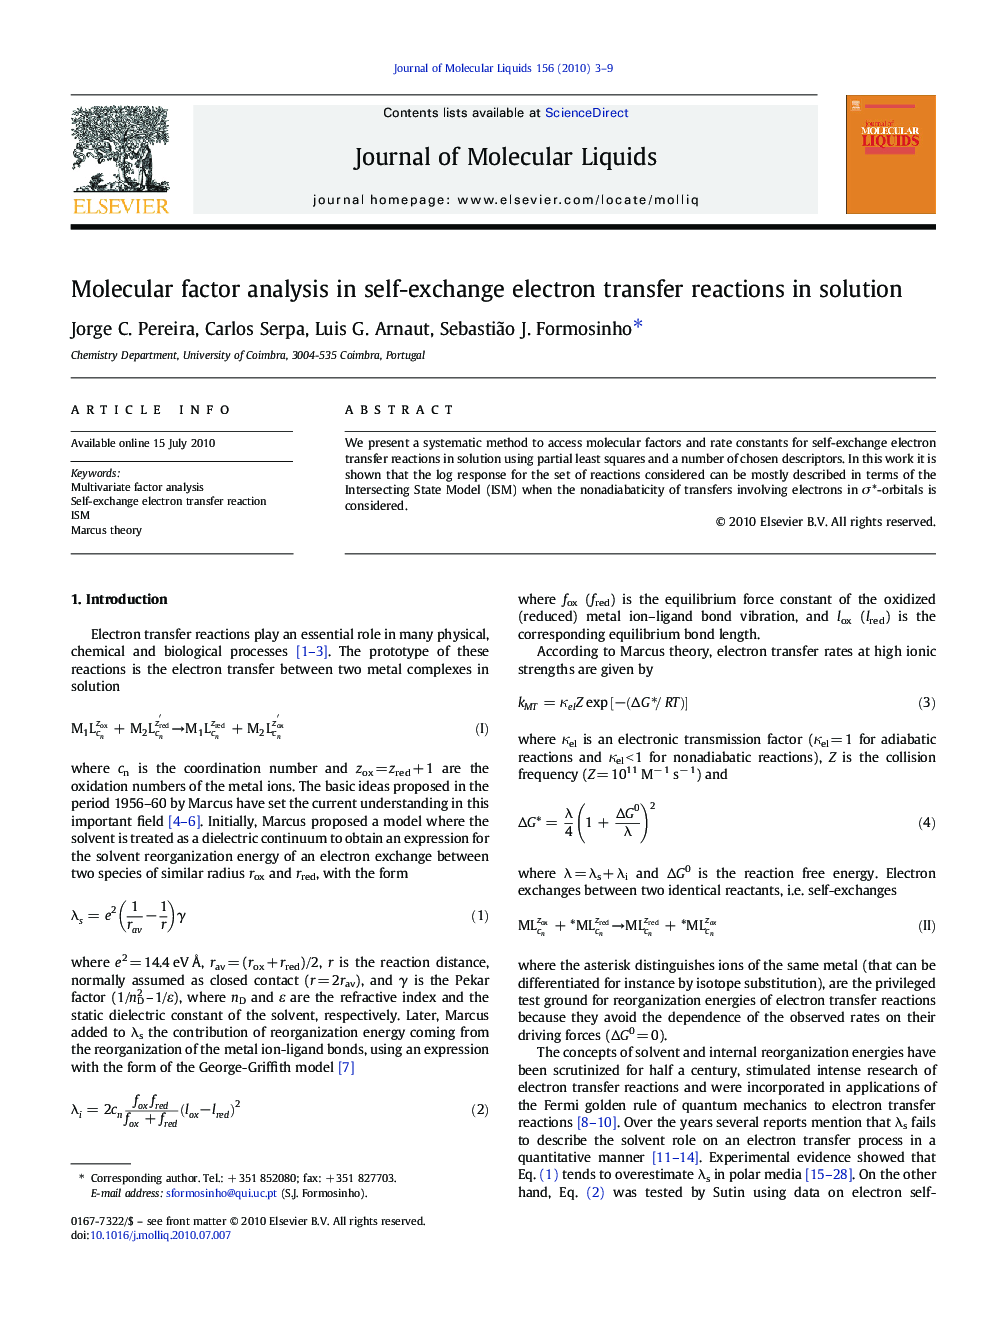 Molecular factor analysis in self-exchange electron transfer reactions in solution